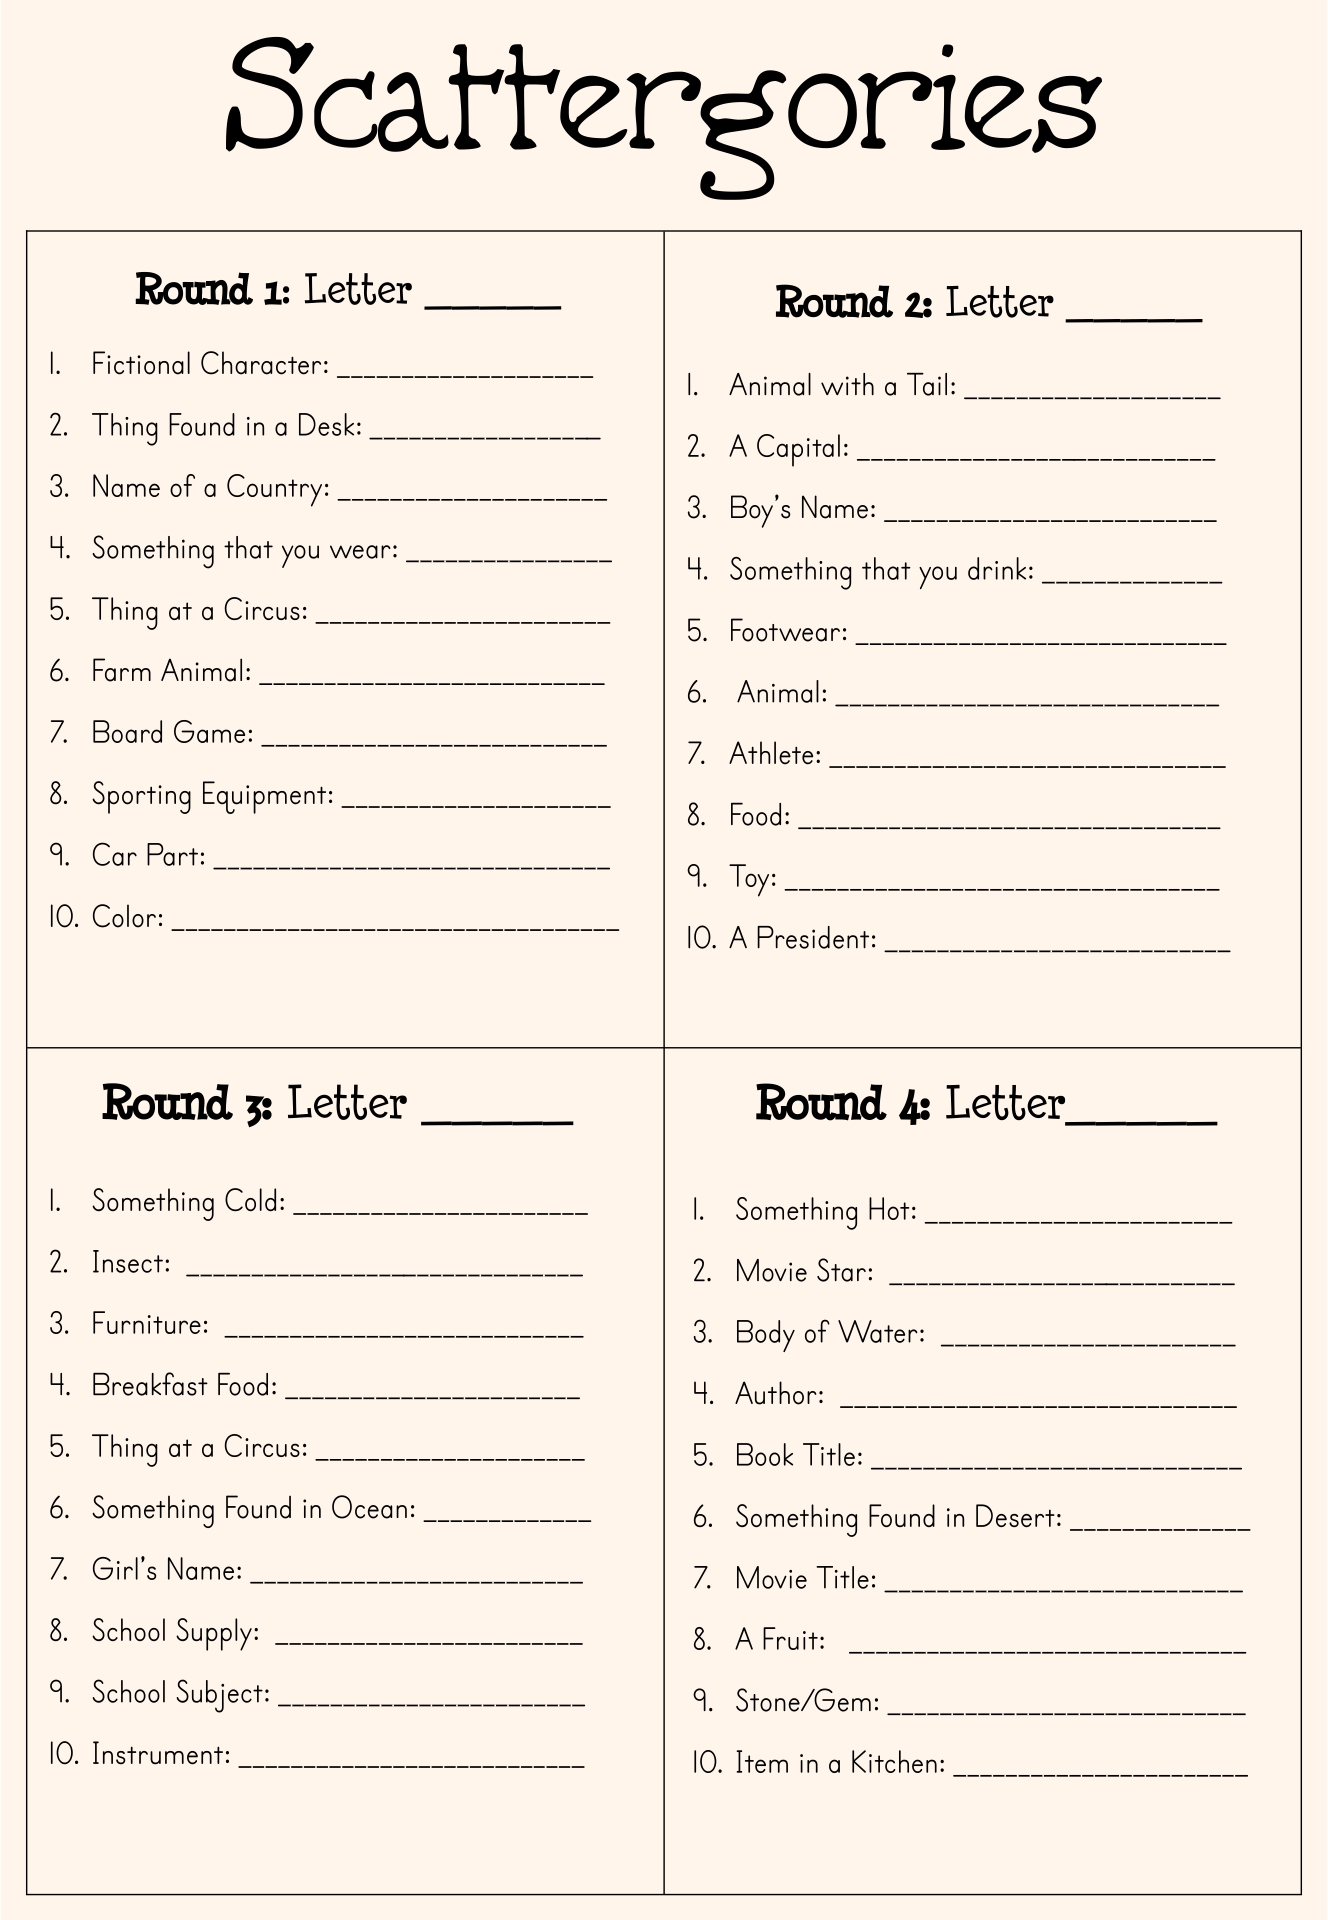 scattergories church and bible lists